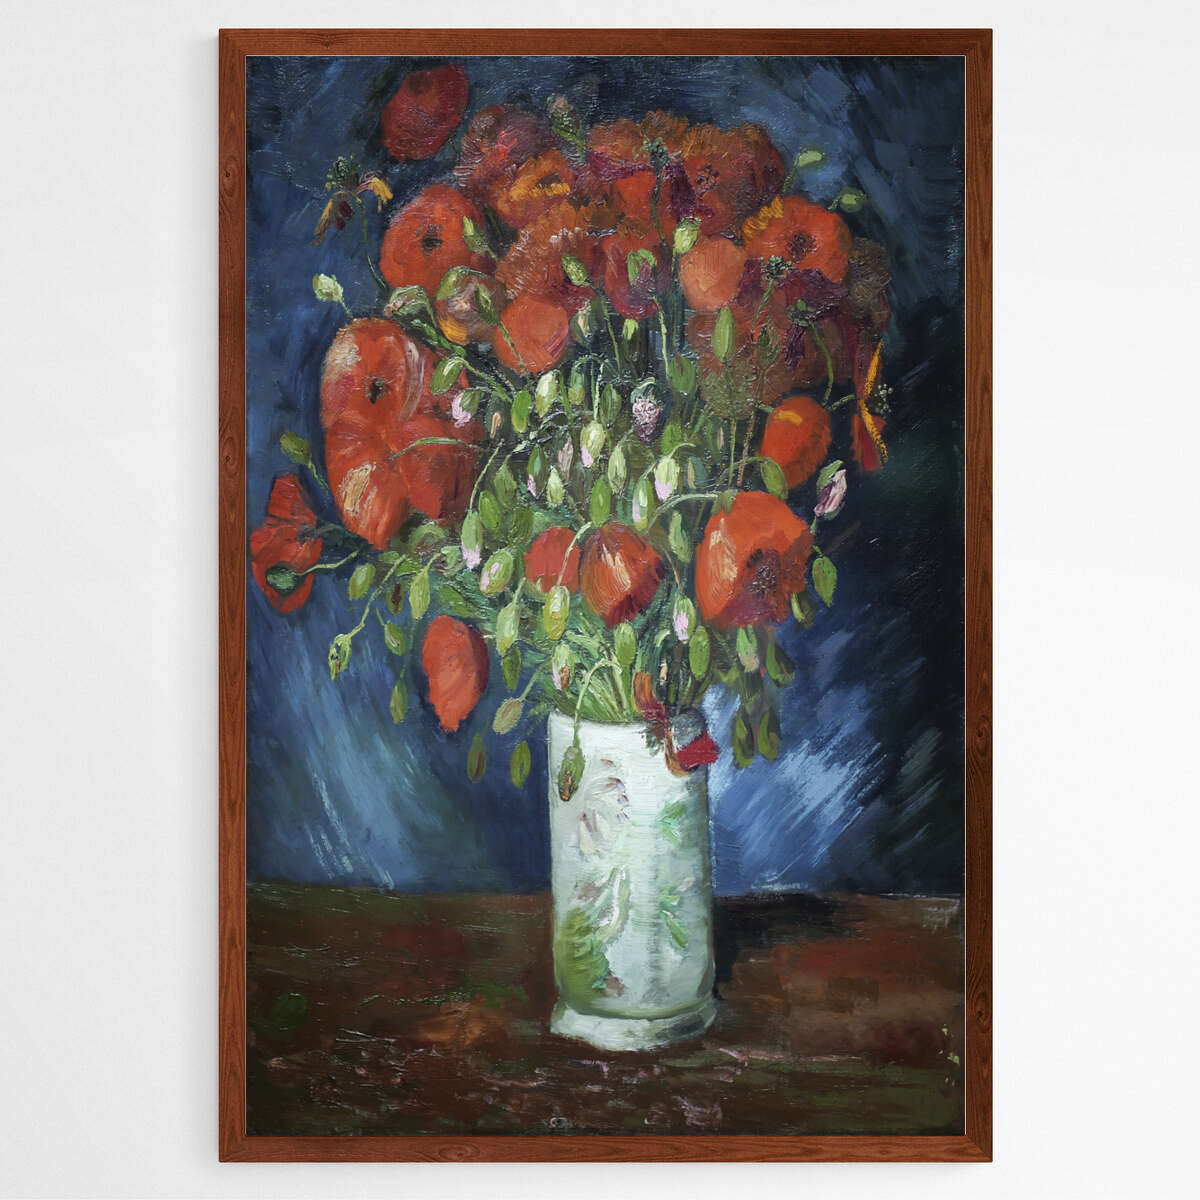 Vase with Poppies by Vincent Van Gogh | Vincent Van Gogh Wall Art Prints - The Canvas Hive